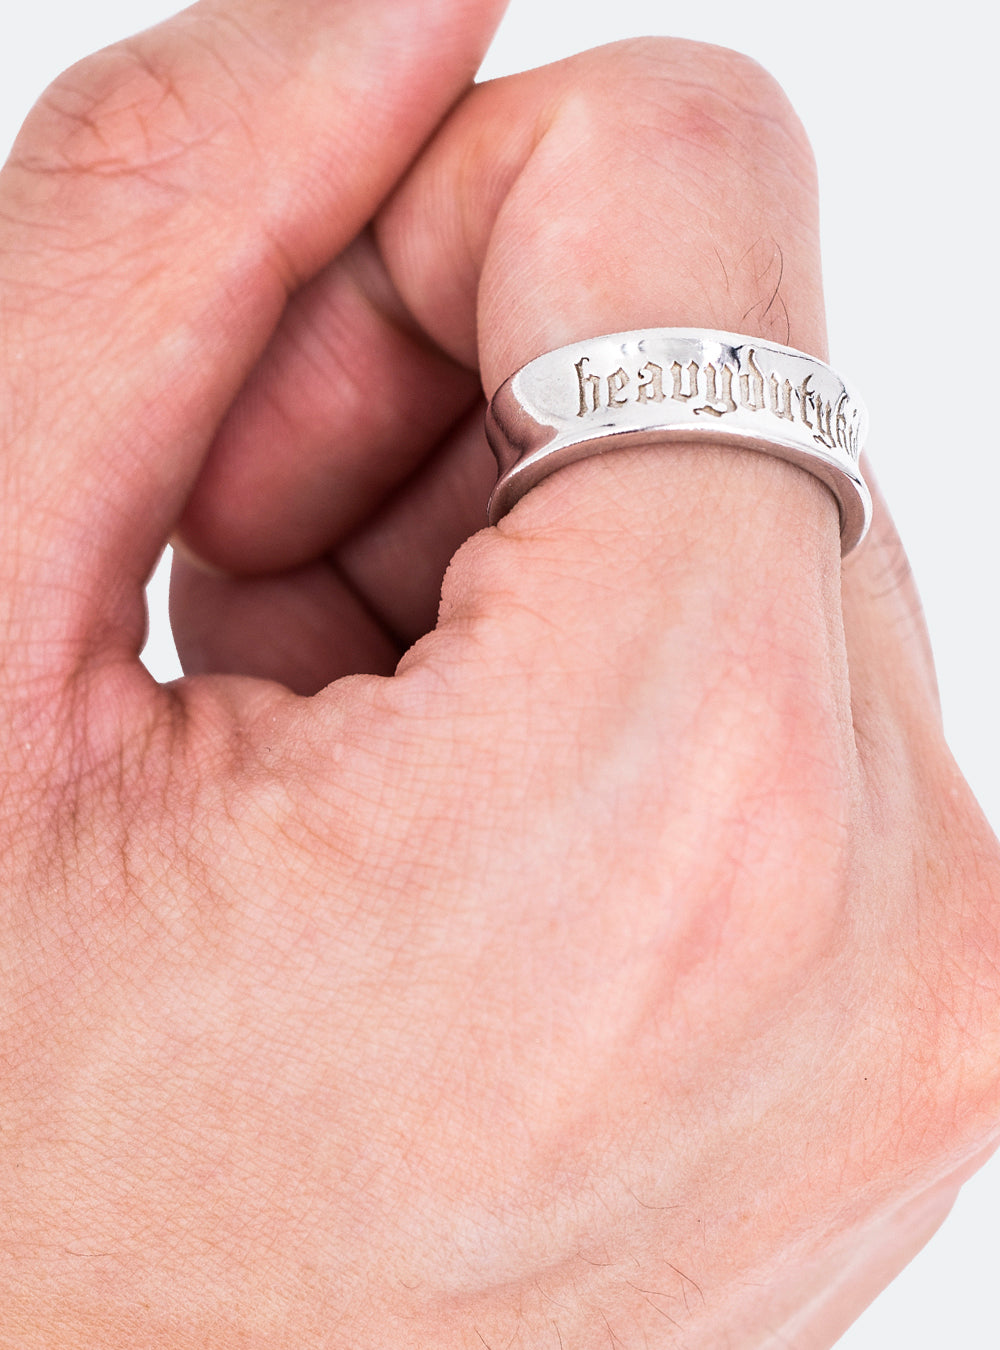 A person's hand holding an MIDNIGHTFACTORY HEAVYDUTYKID ring that says harry potter.